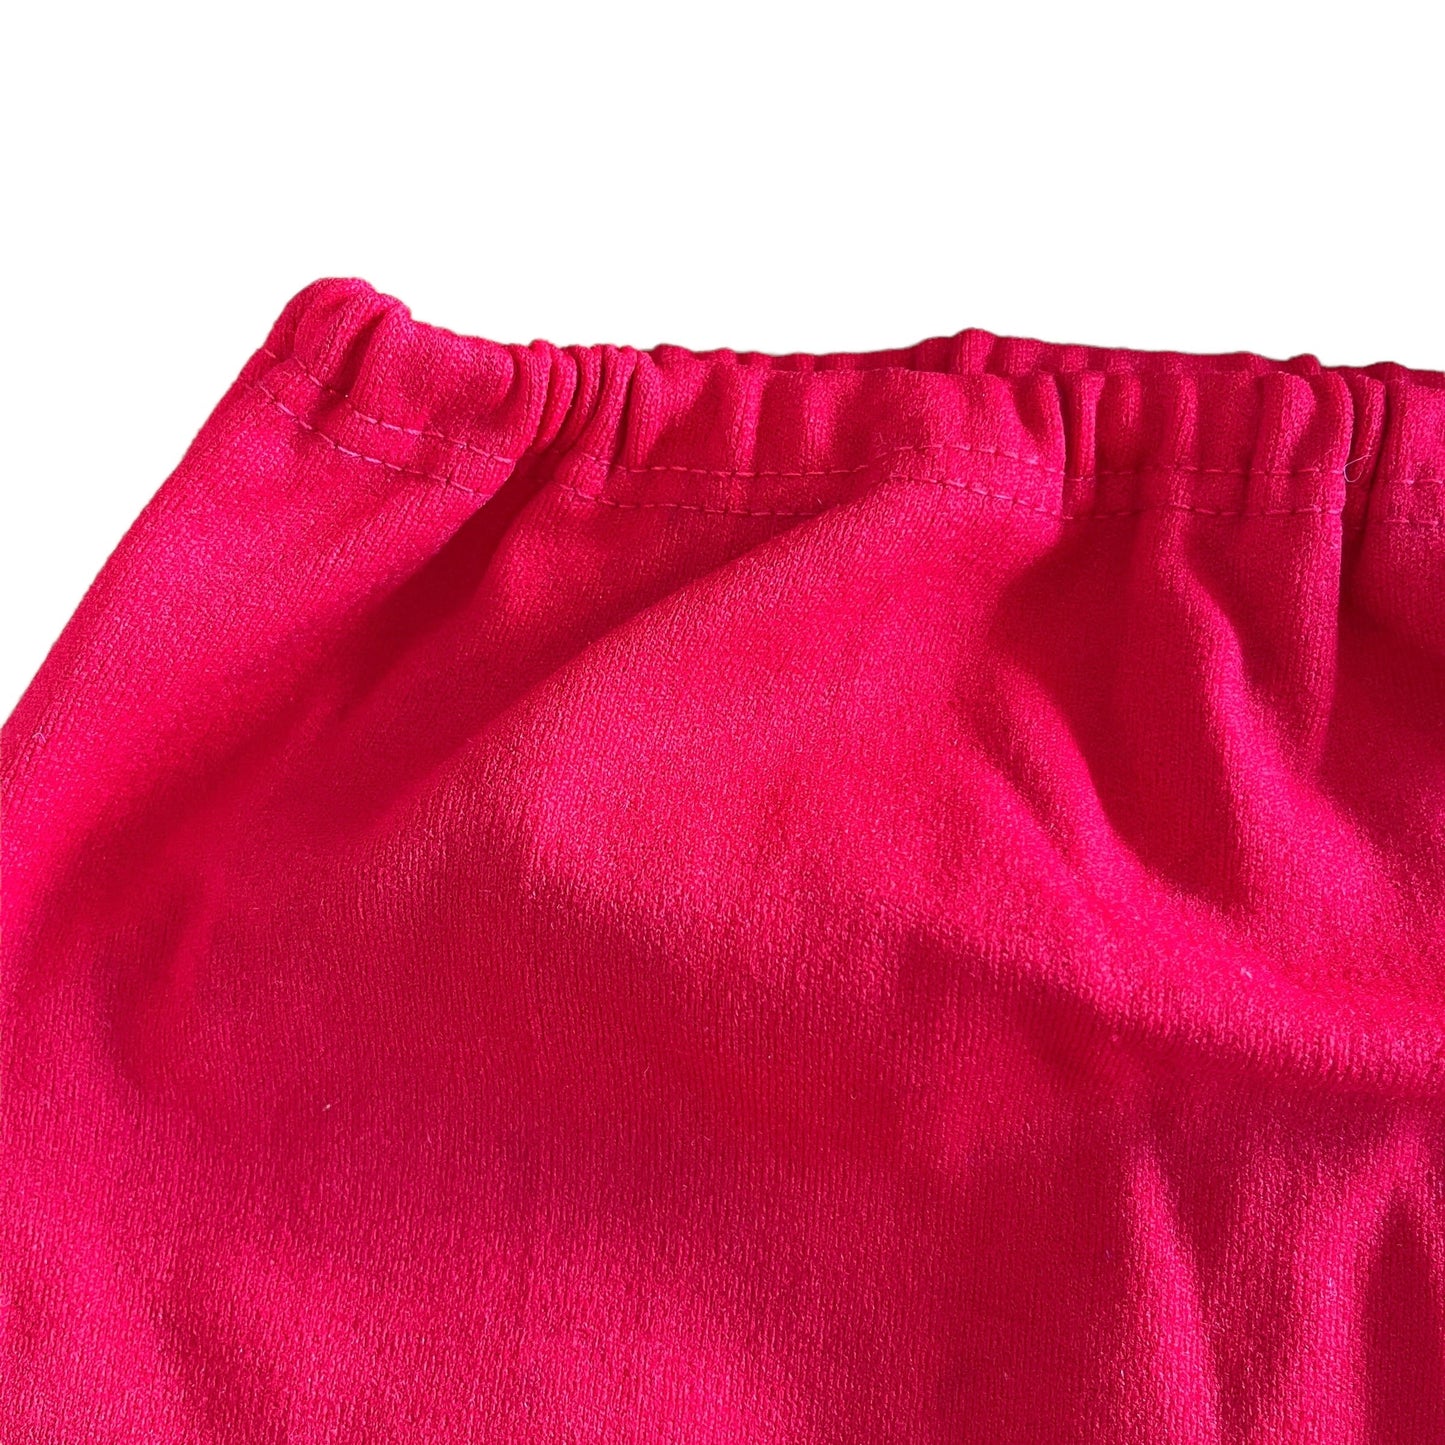 Vintage 70's Red Swimming  Trunks / Shorts  6-8 and 10-12 Years